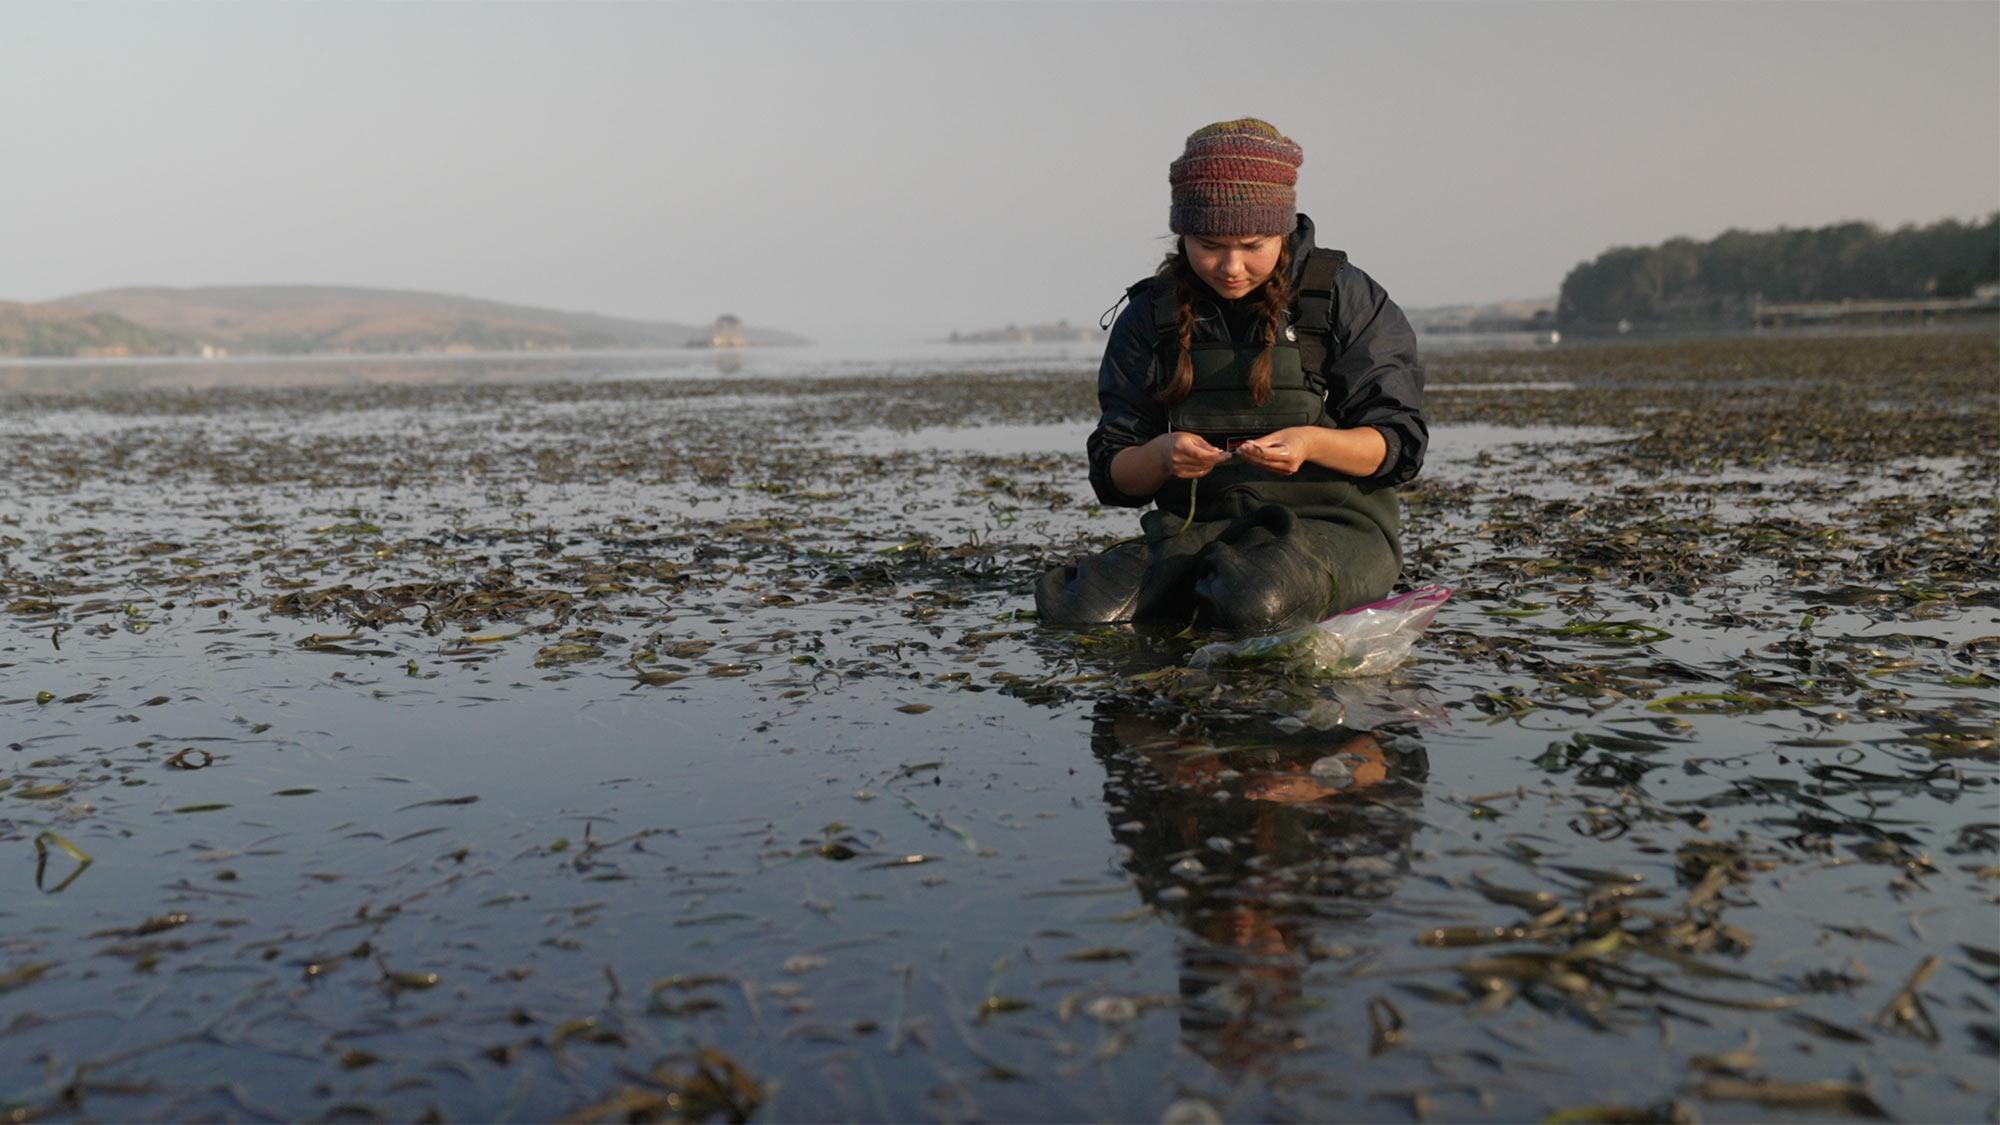 A student researcher wades through the tidal waters at Bodega Bay